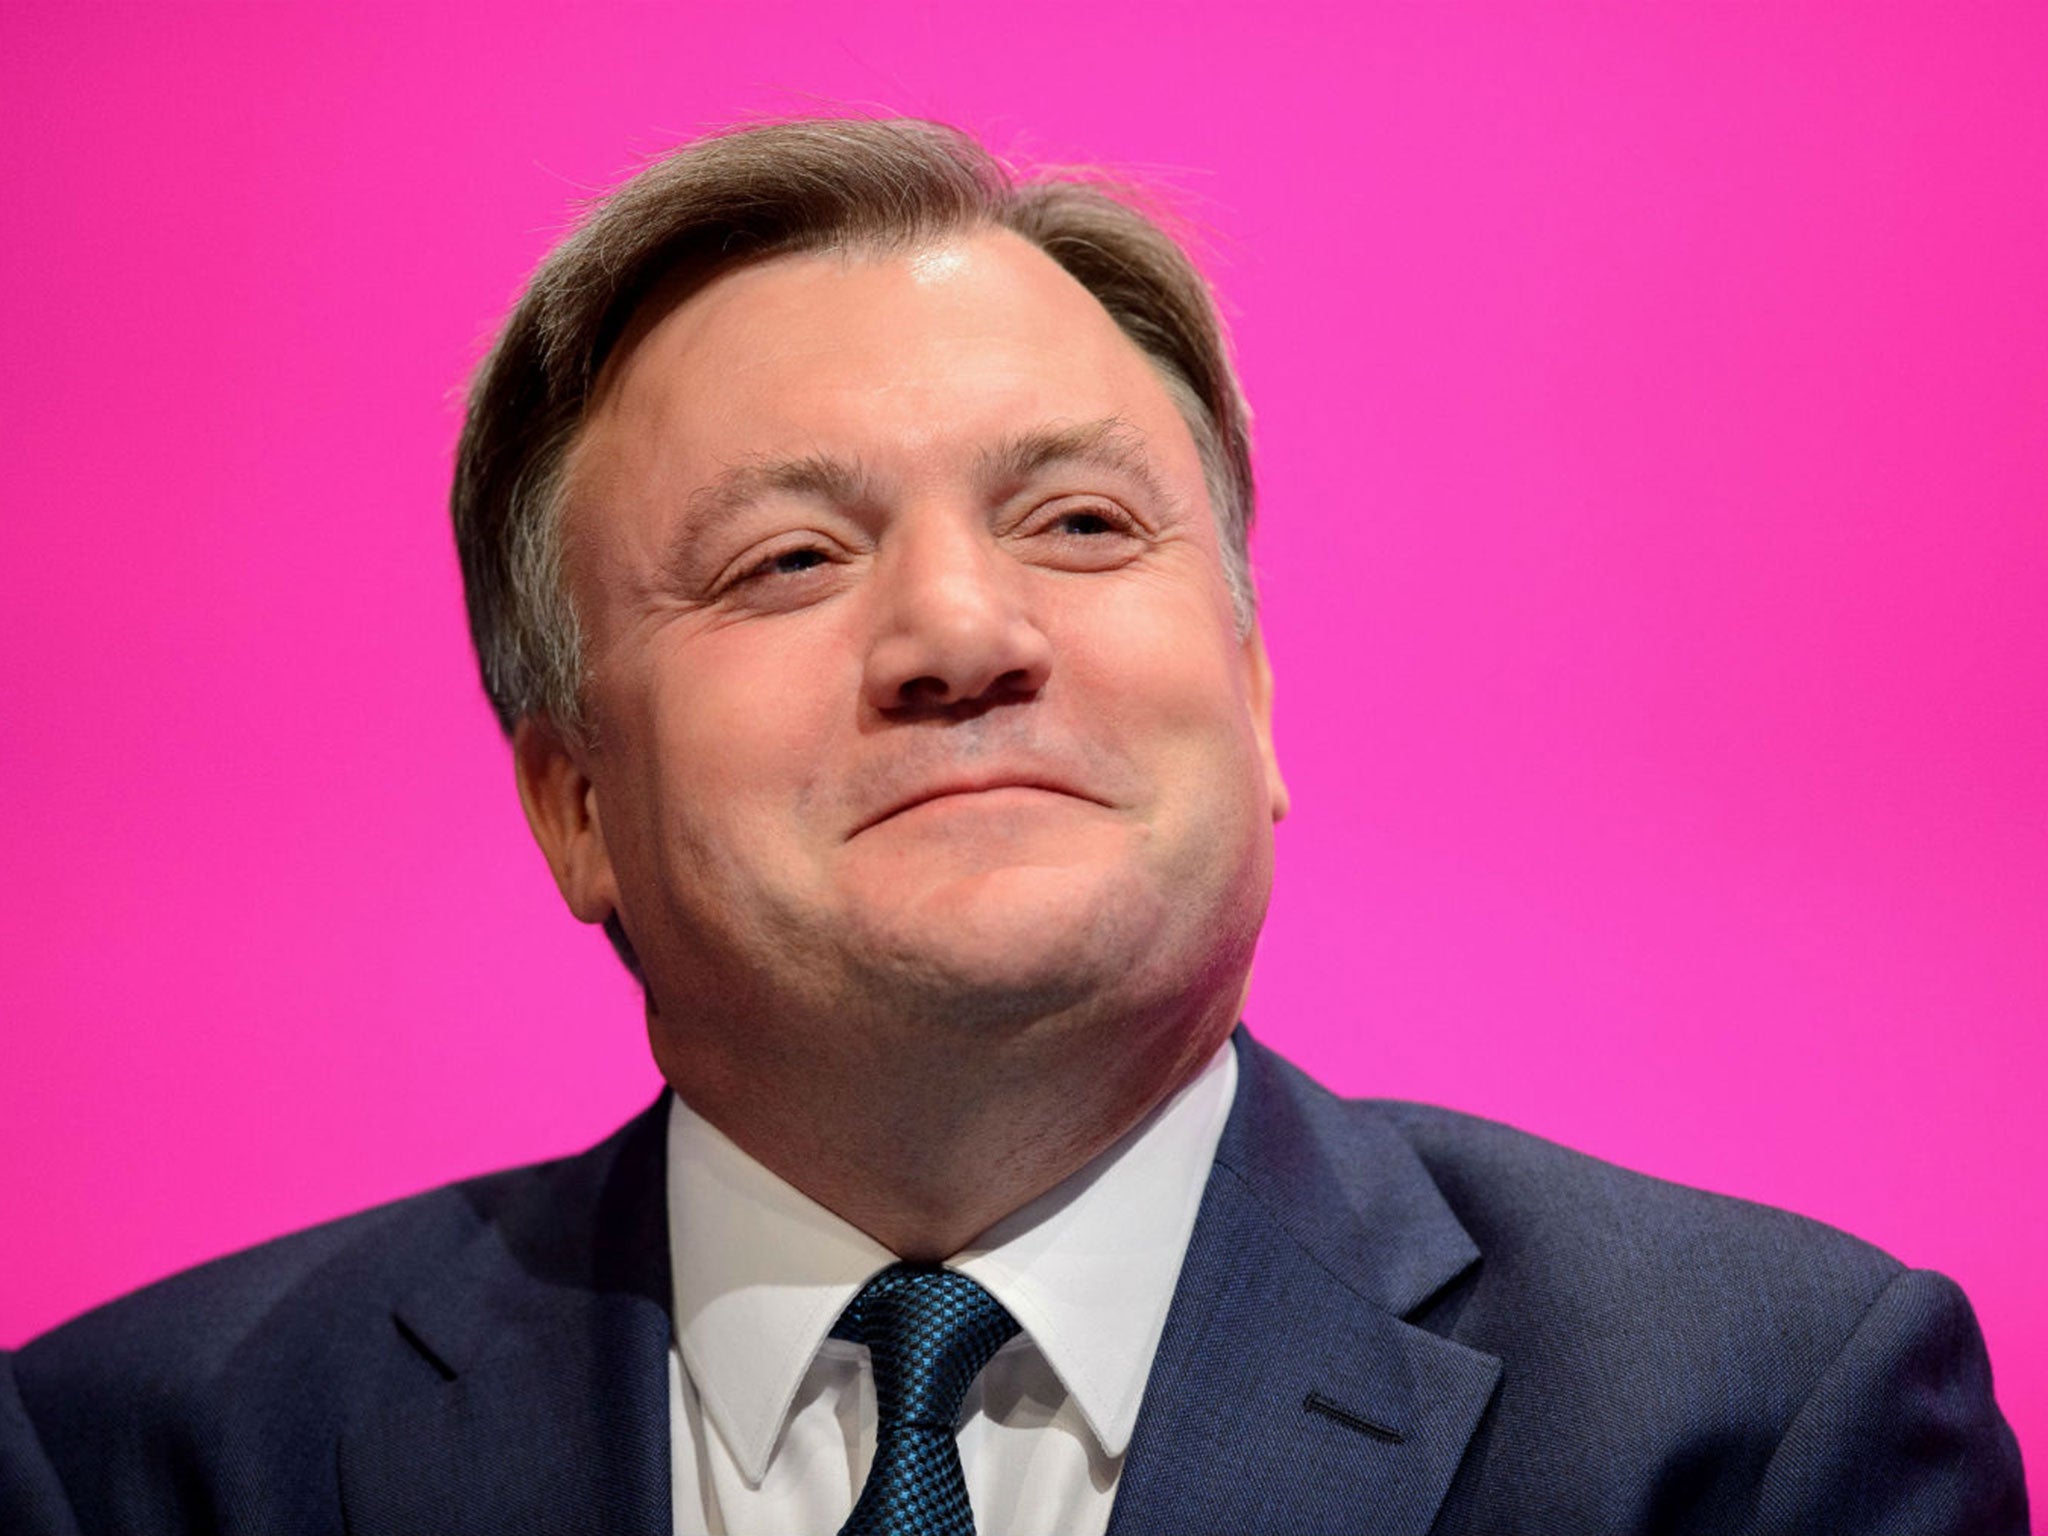 Ed Balls had been hotly rumoured to be taking to the Strictly Come Dancing dancefloor